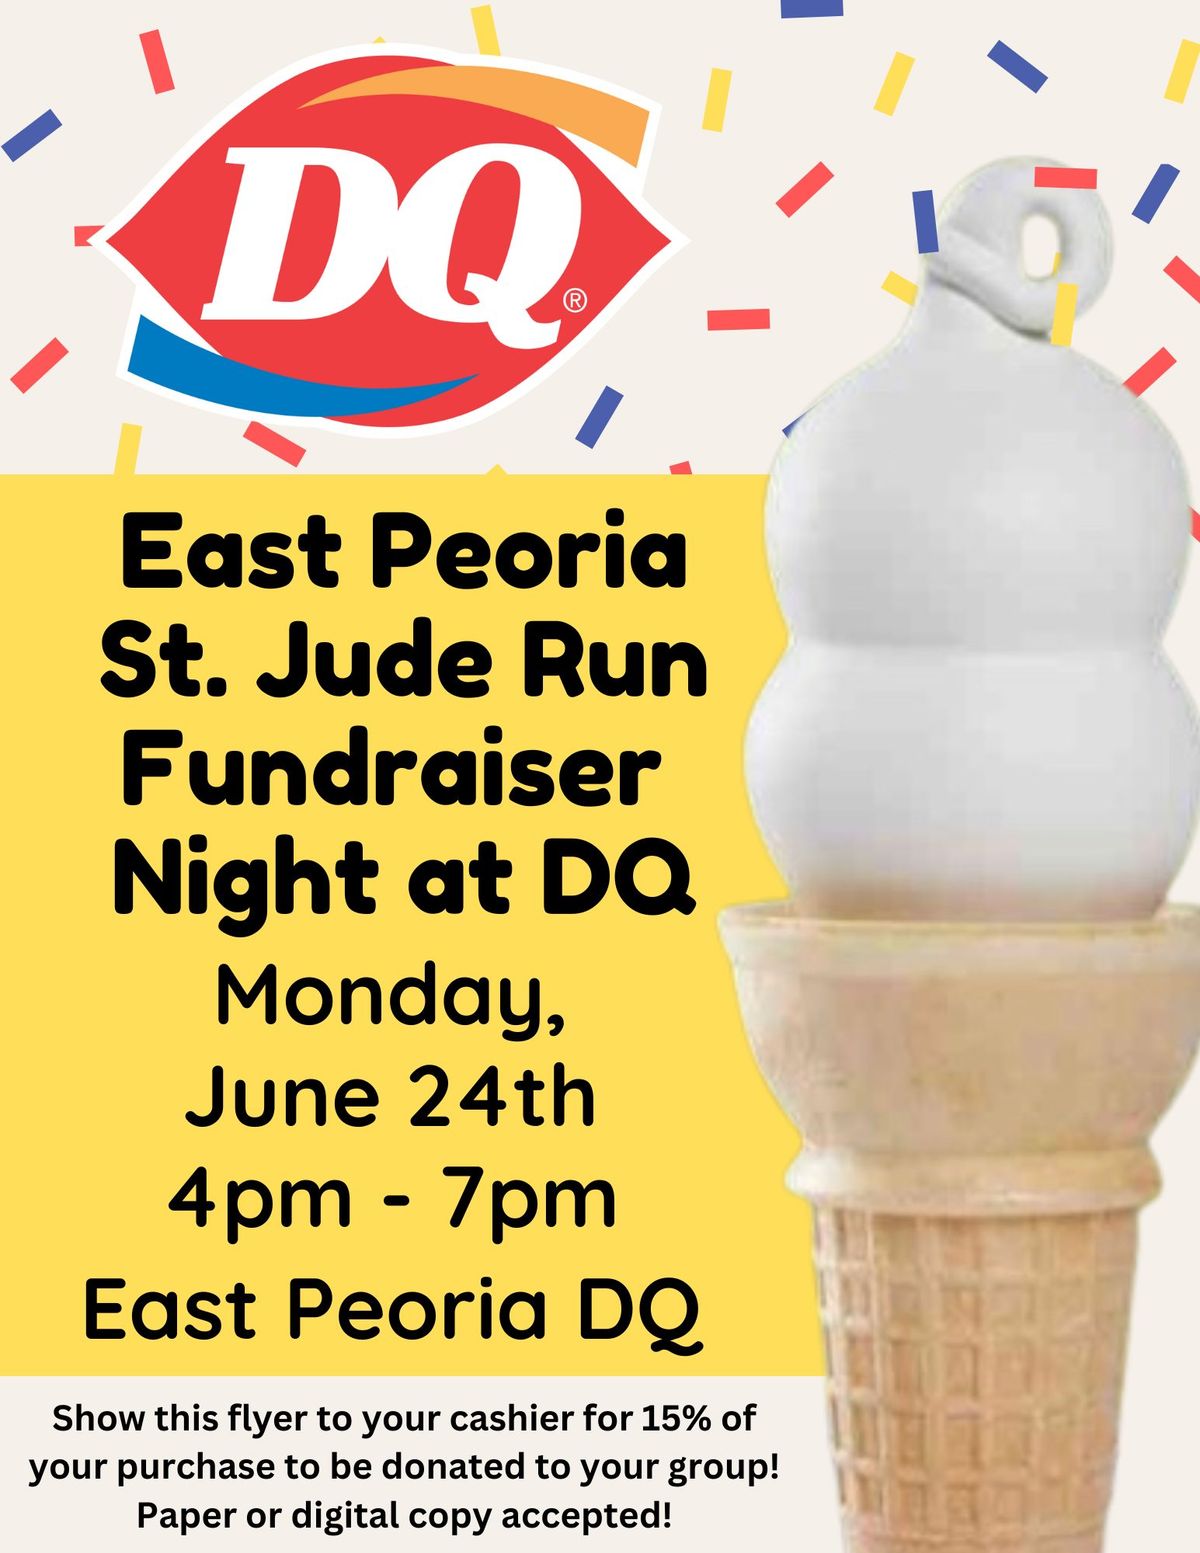 DQ St Jude Fundraiser - East Peoria St. Jude Run Fundraiser Night at EP DQ! 